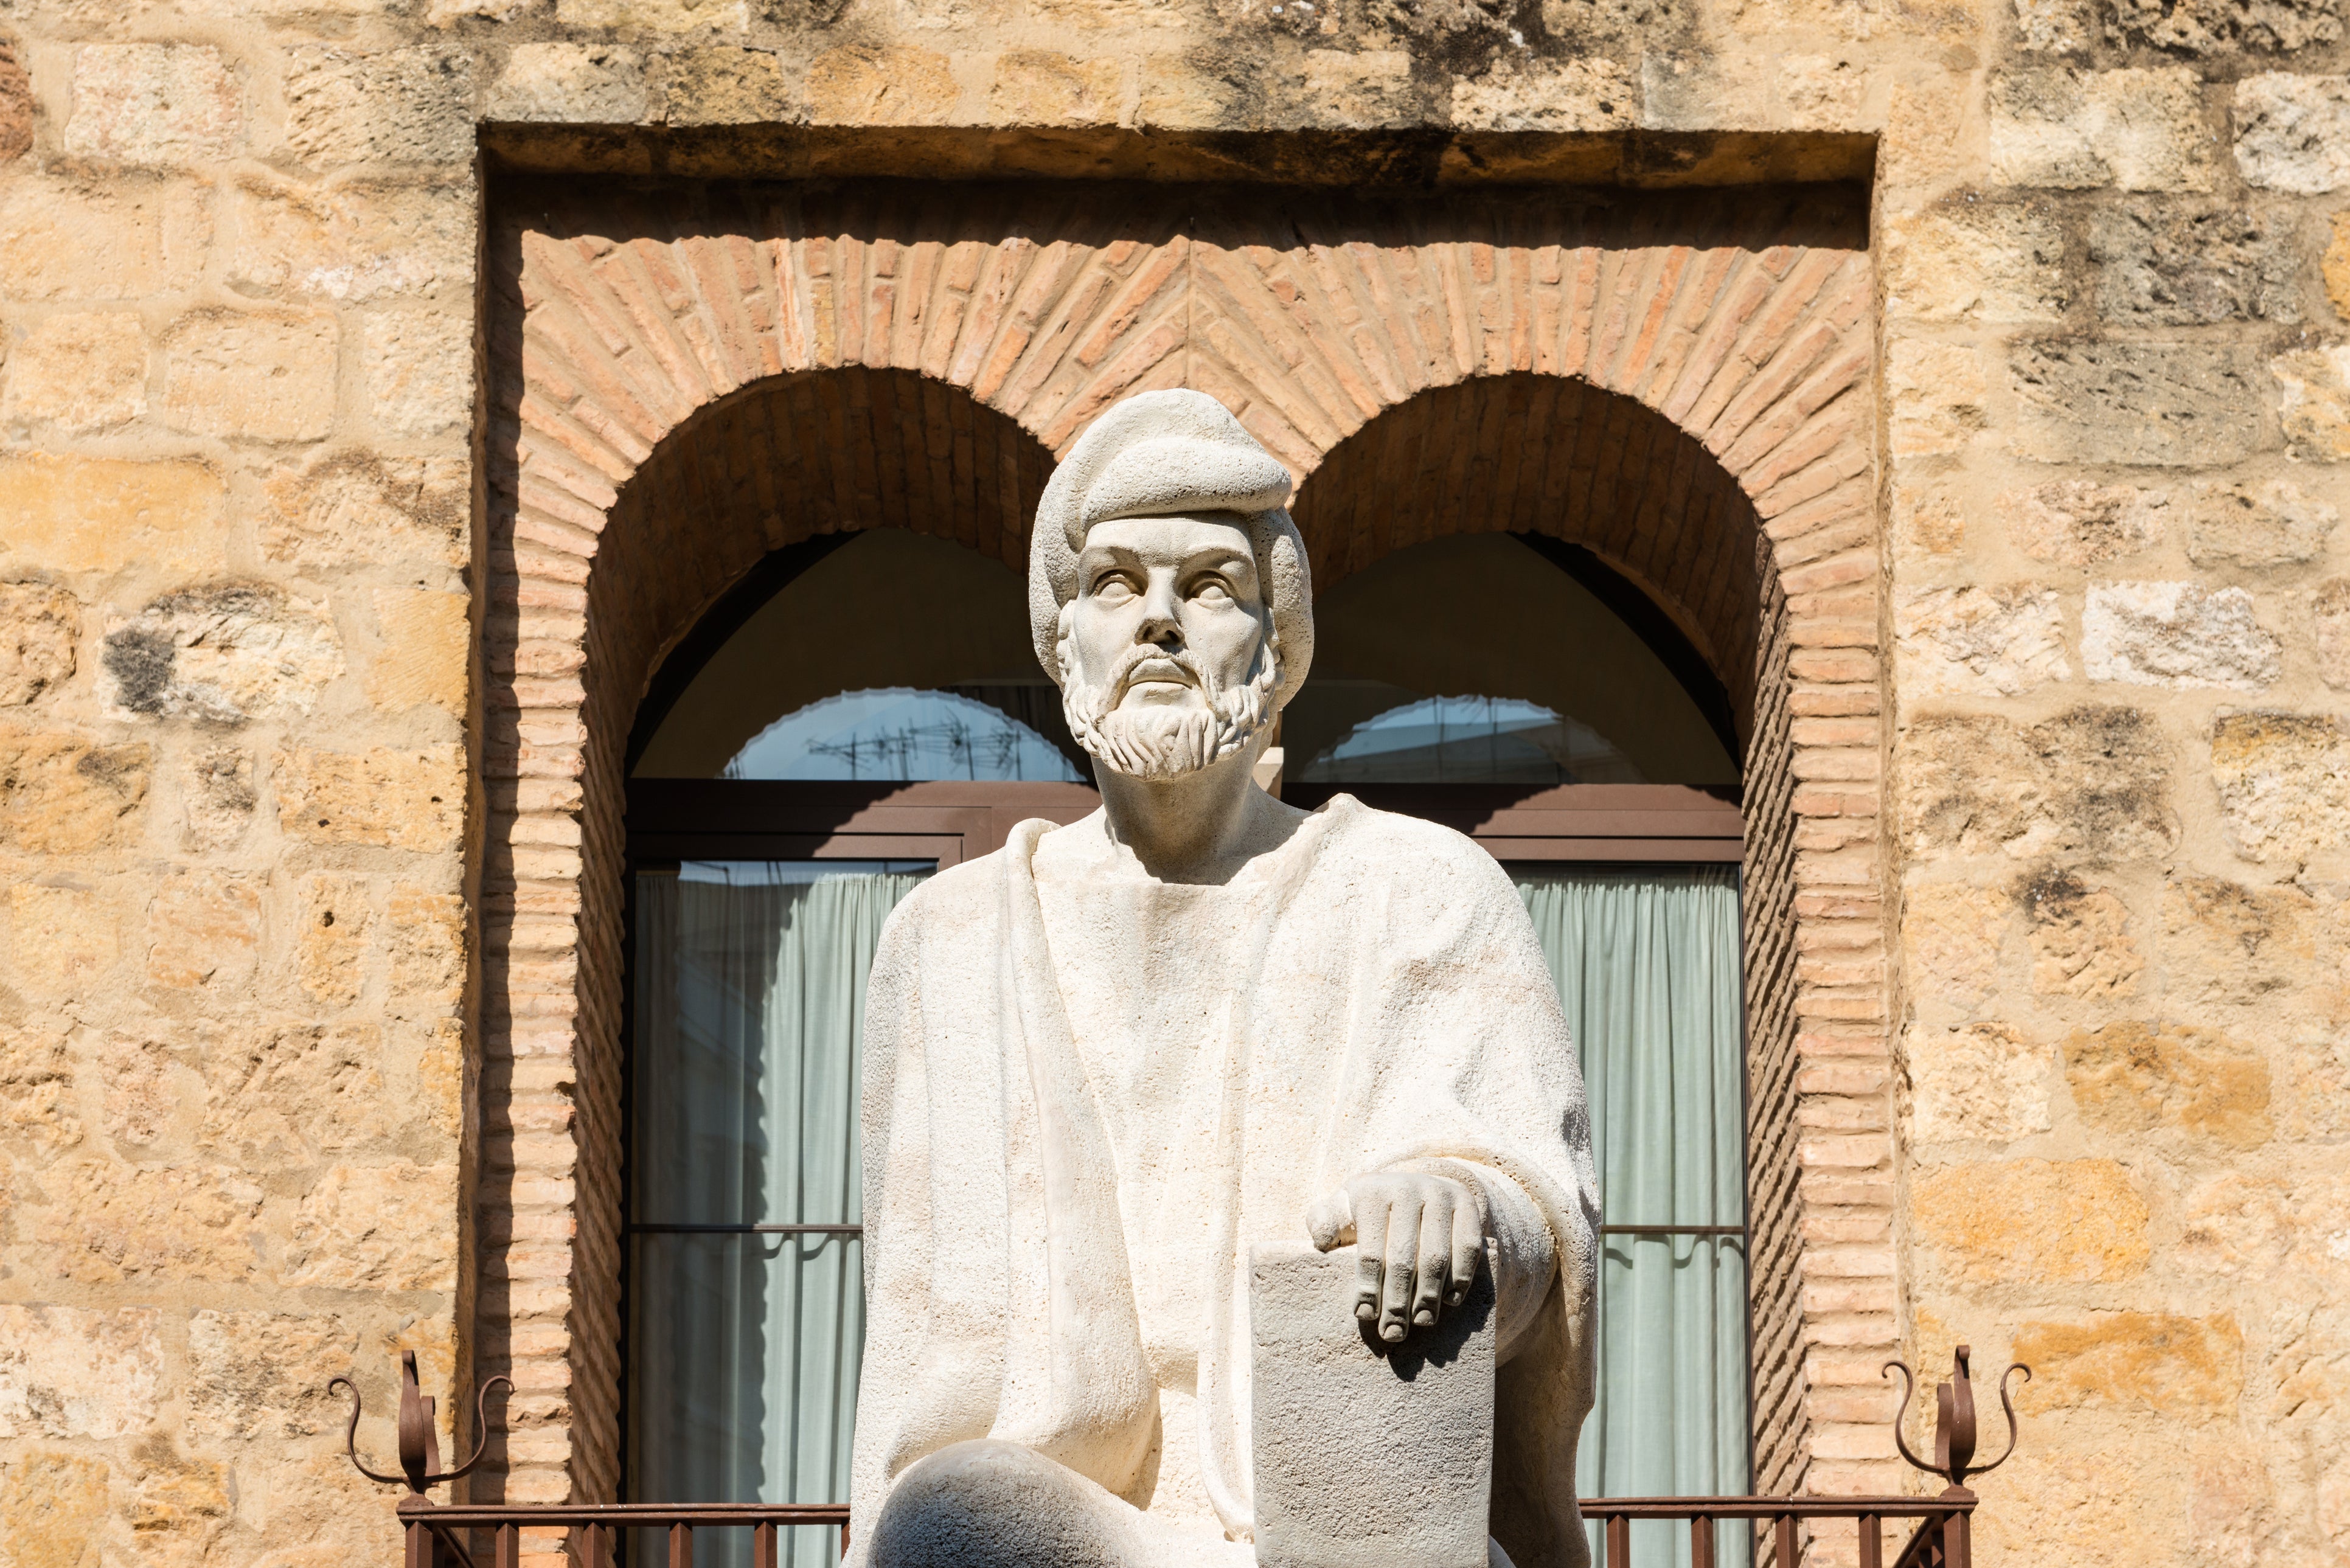 A statue of Averroes in his birthplace of Cordova, Spain